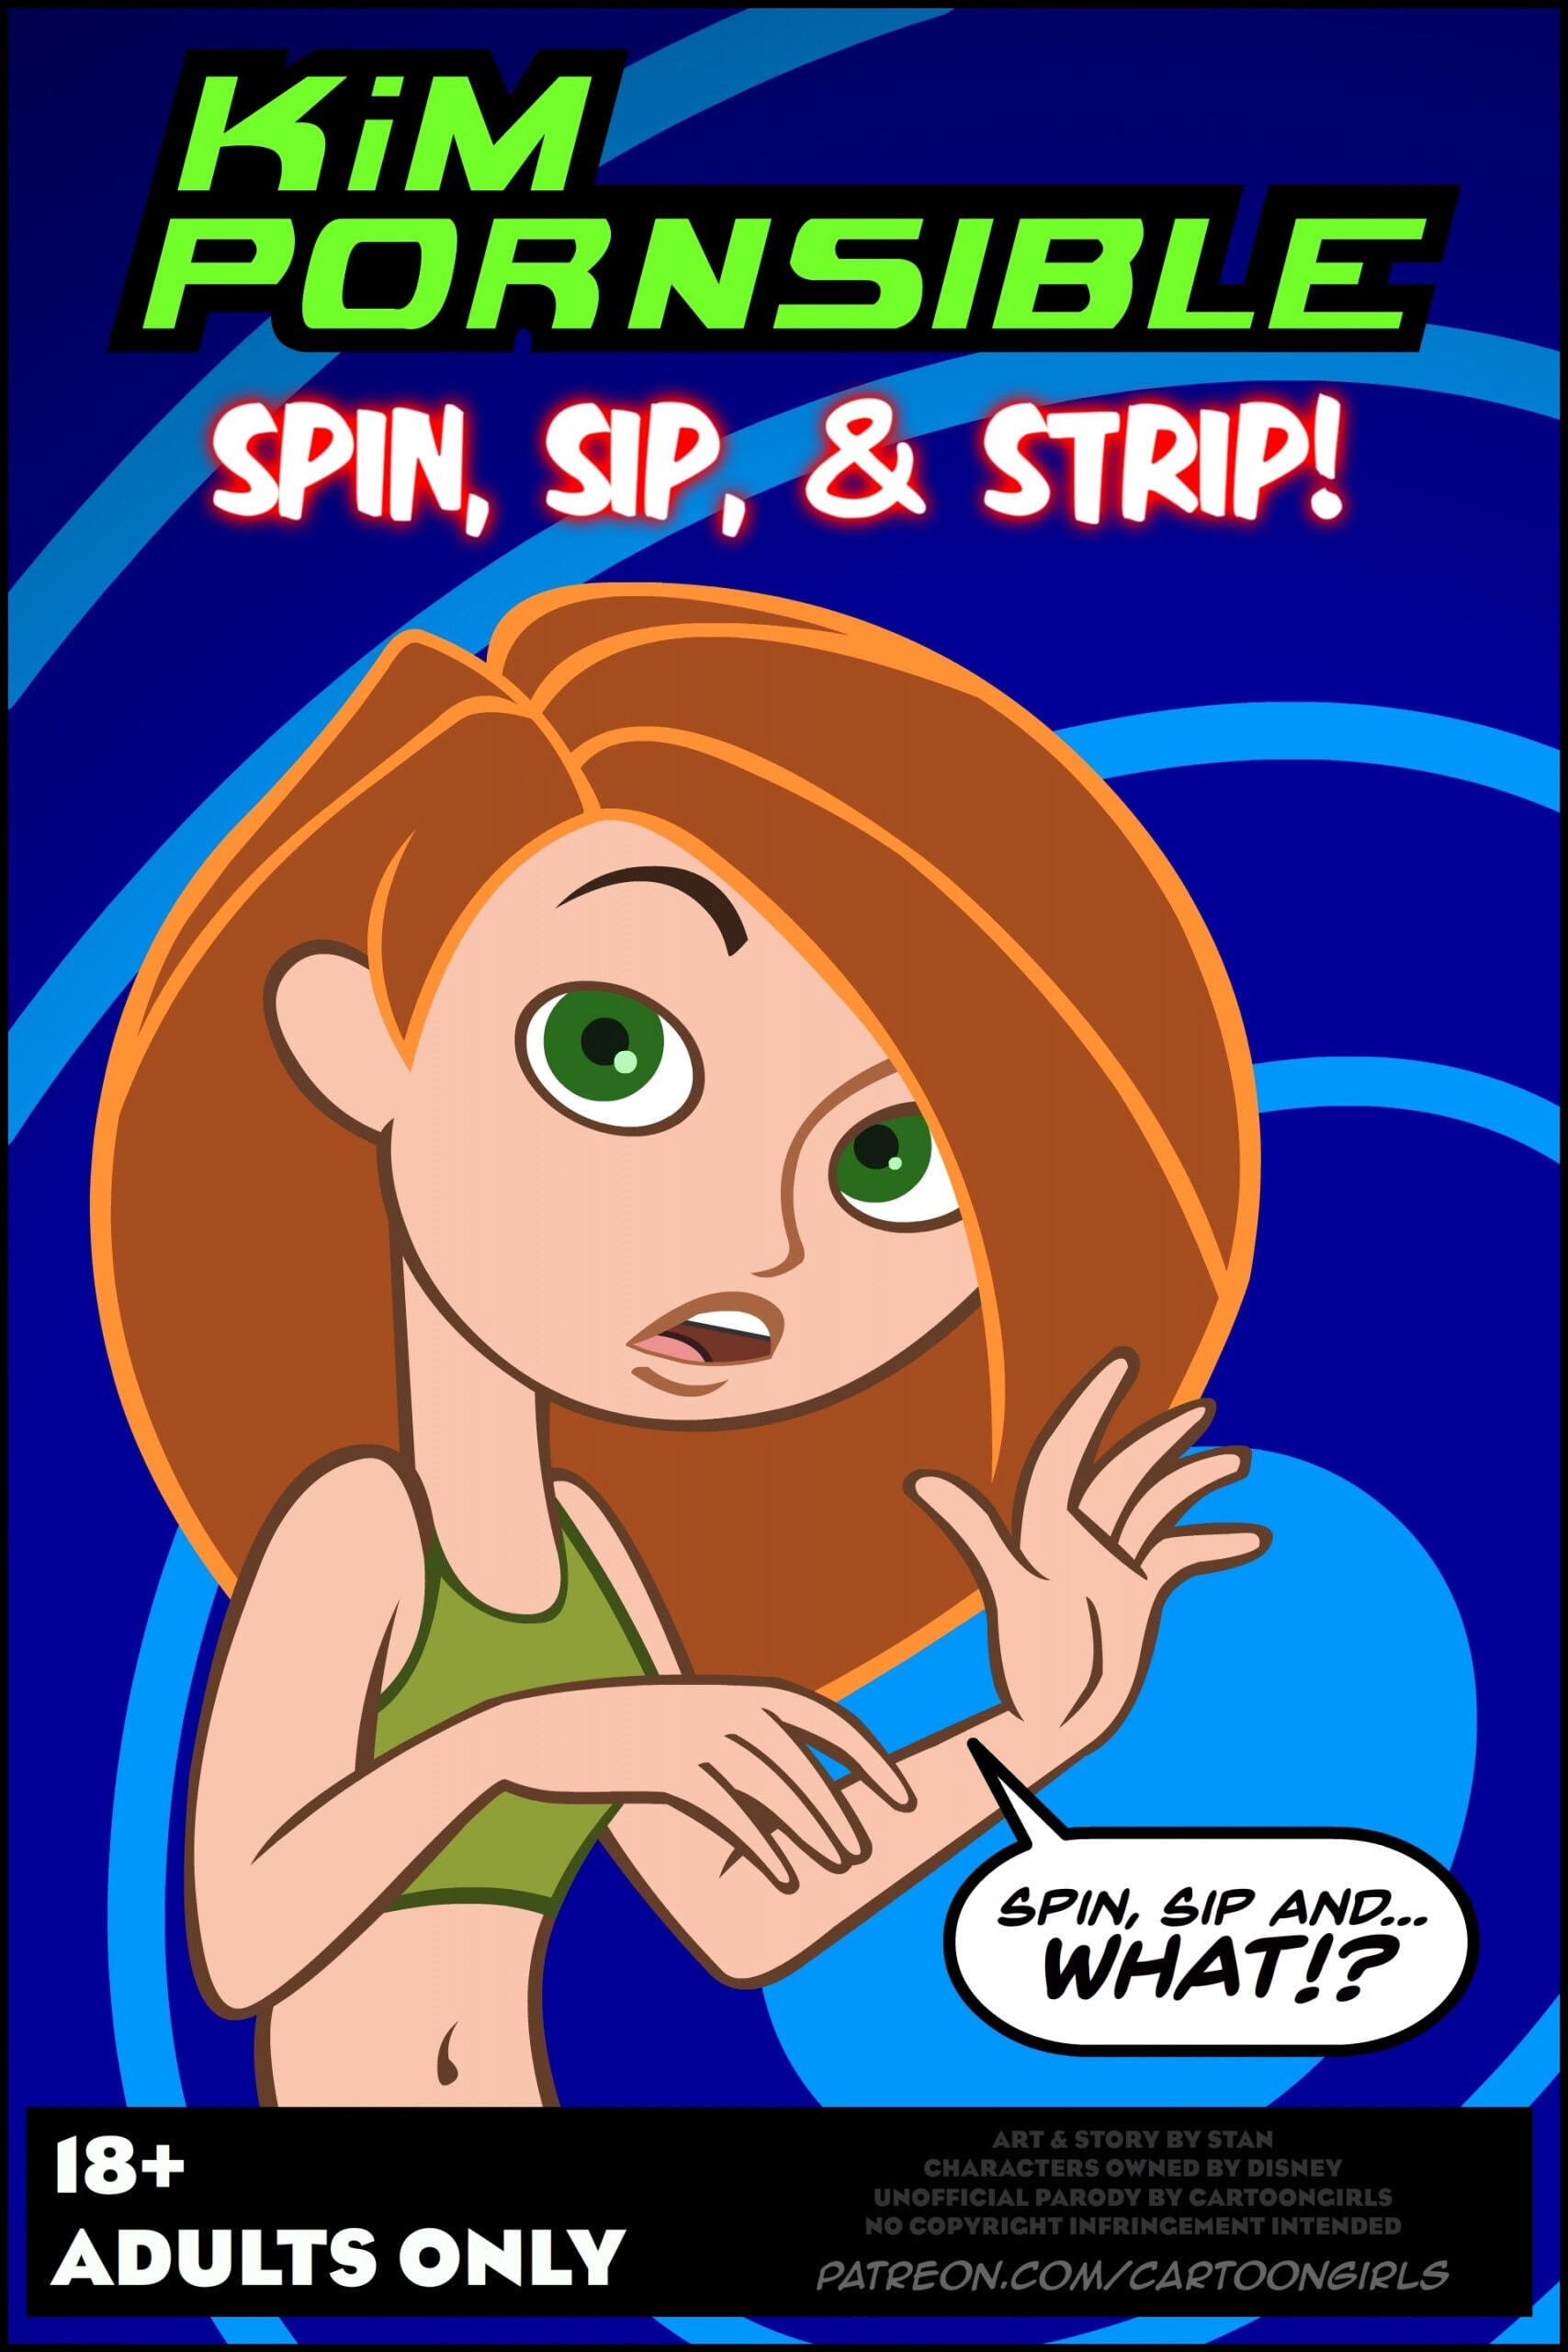 Kim Possible Spin, Sip & Strip! - Page 1